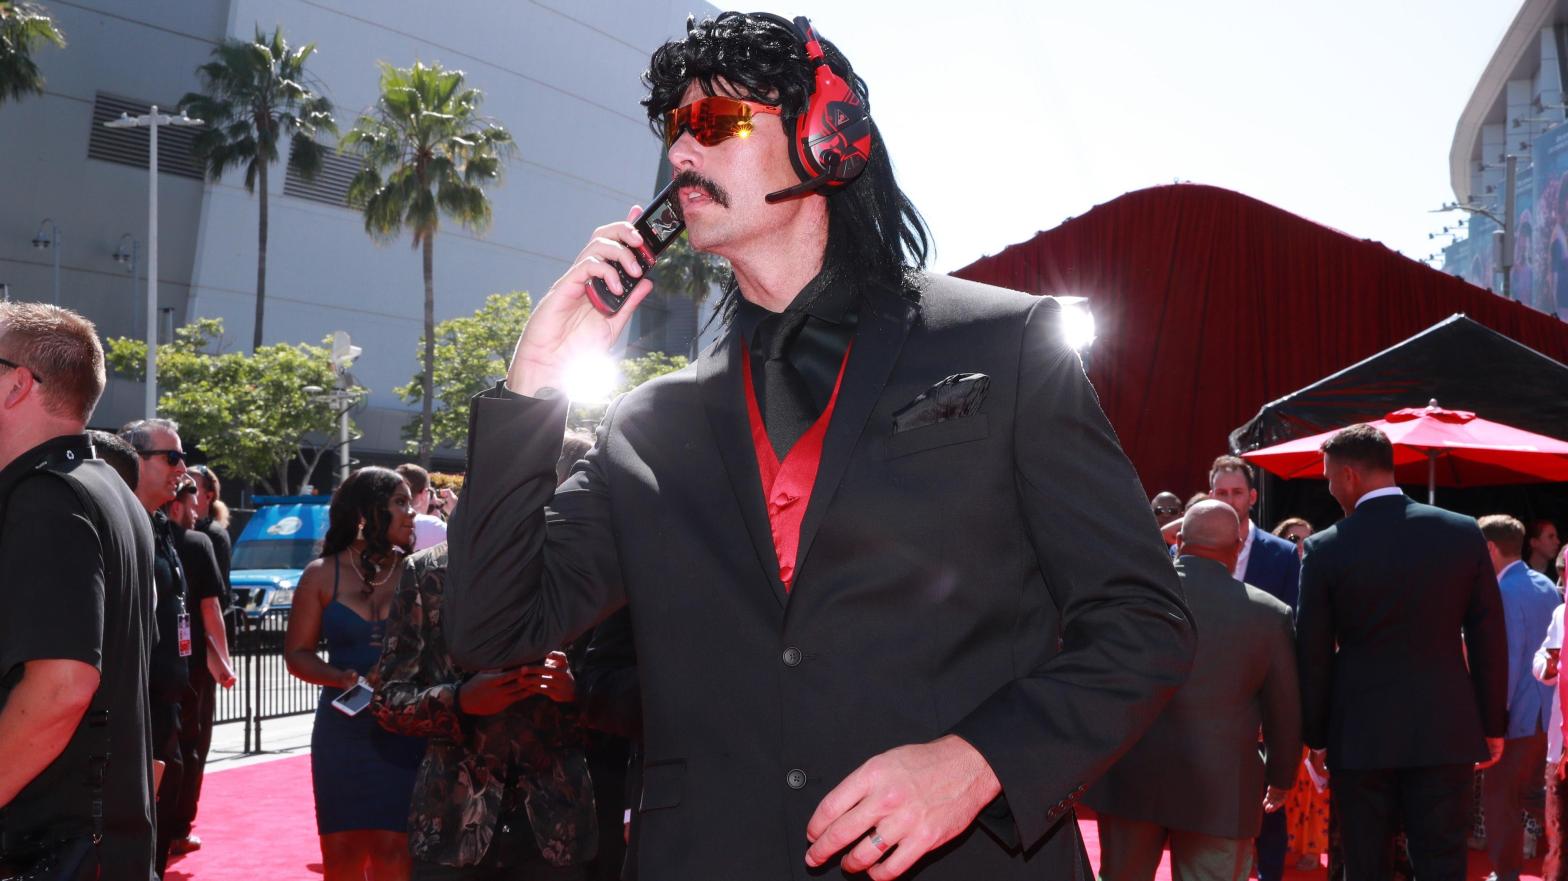 Dr. Disrespect’s YouTube Channel Demonetised After He Admits to ‘Inappropriate’ Chat With Minors